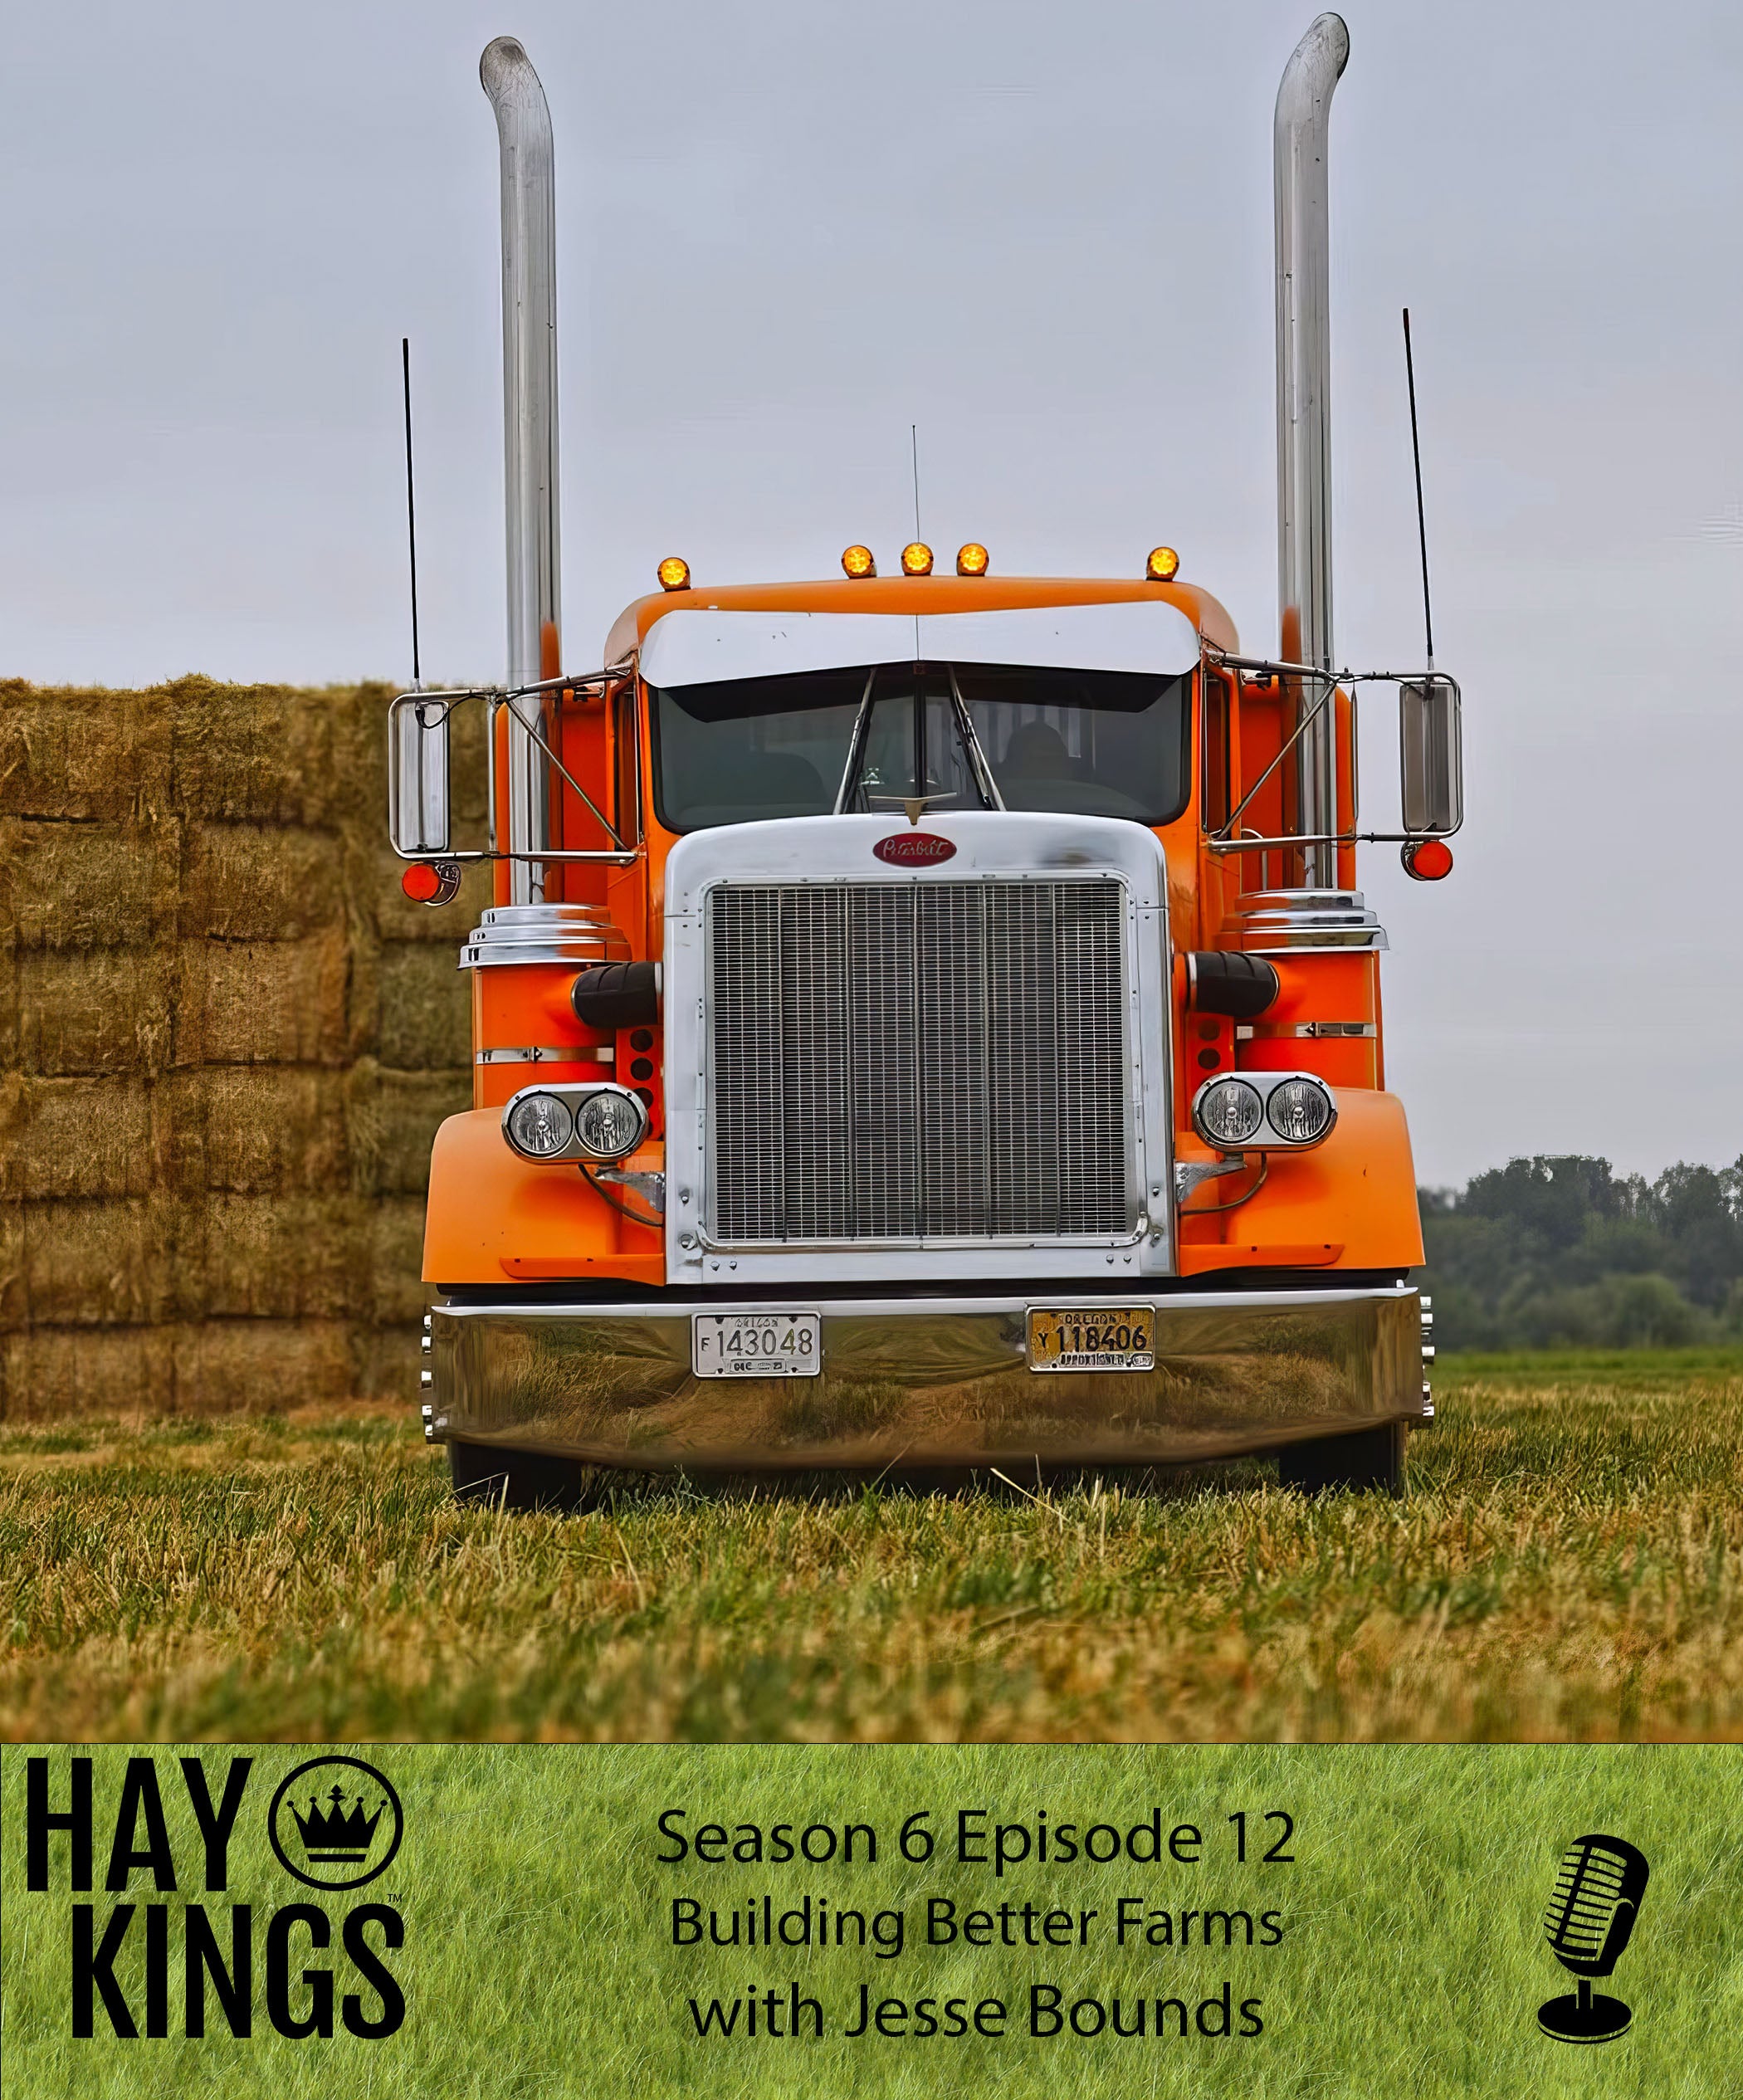 Hay Kings Podcast: Building Better Farms (S6:E12)